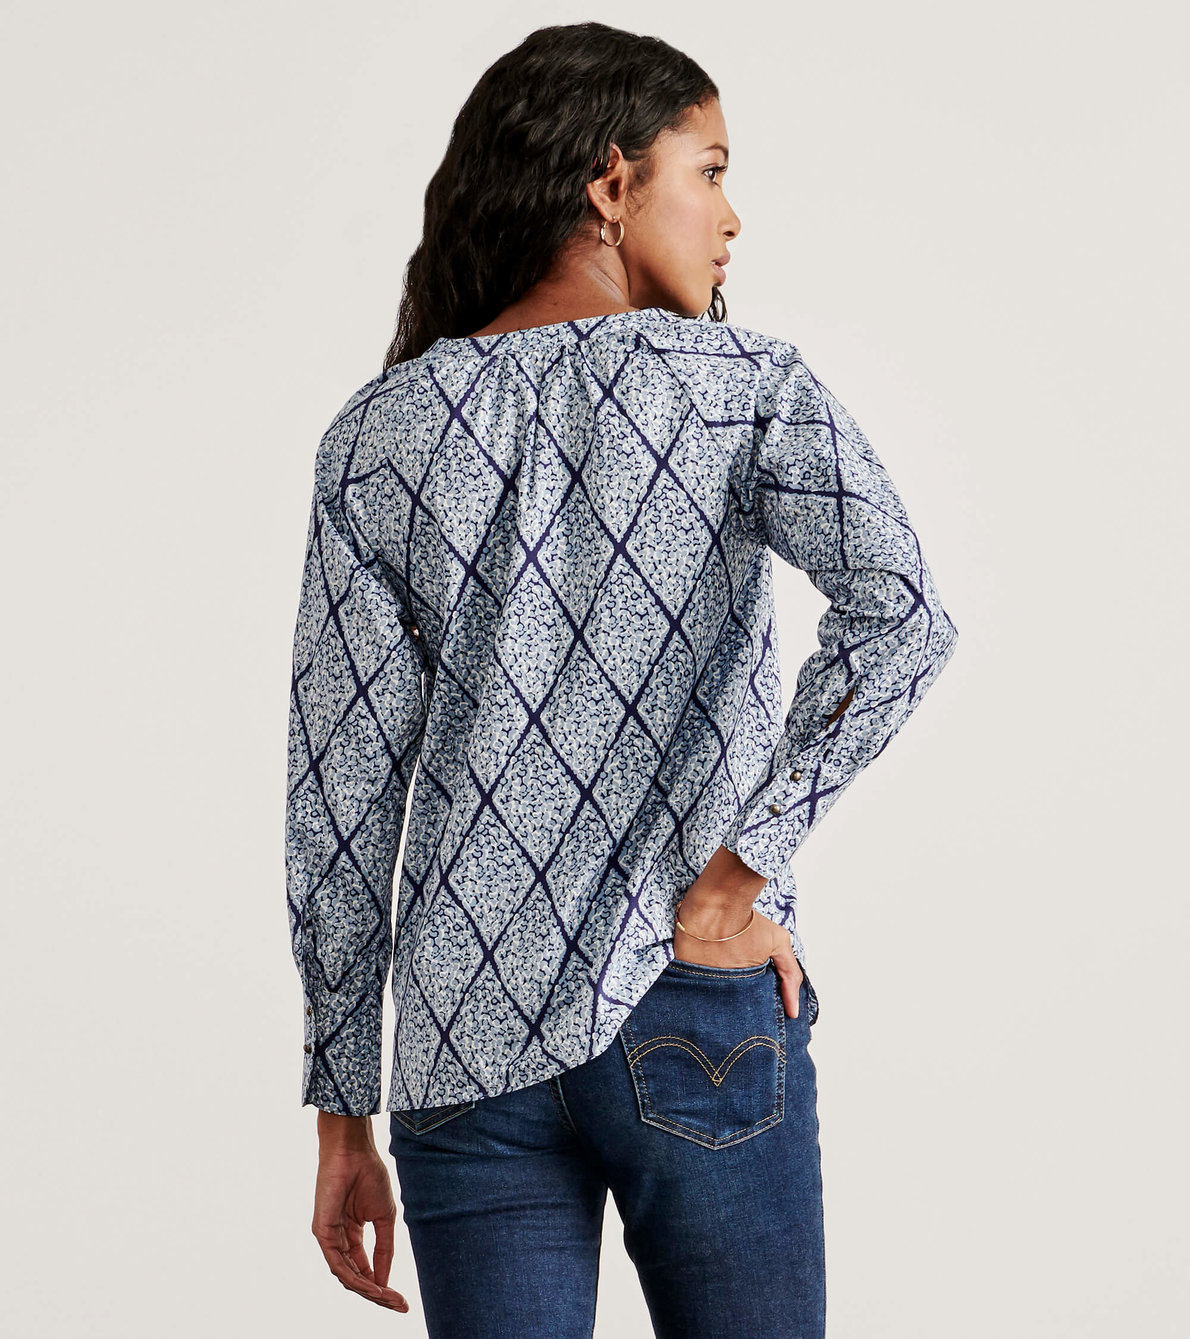 View larger image of Lila Blouse - Textured Diamonds